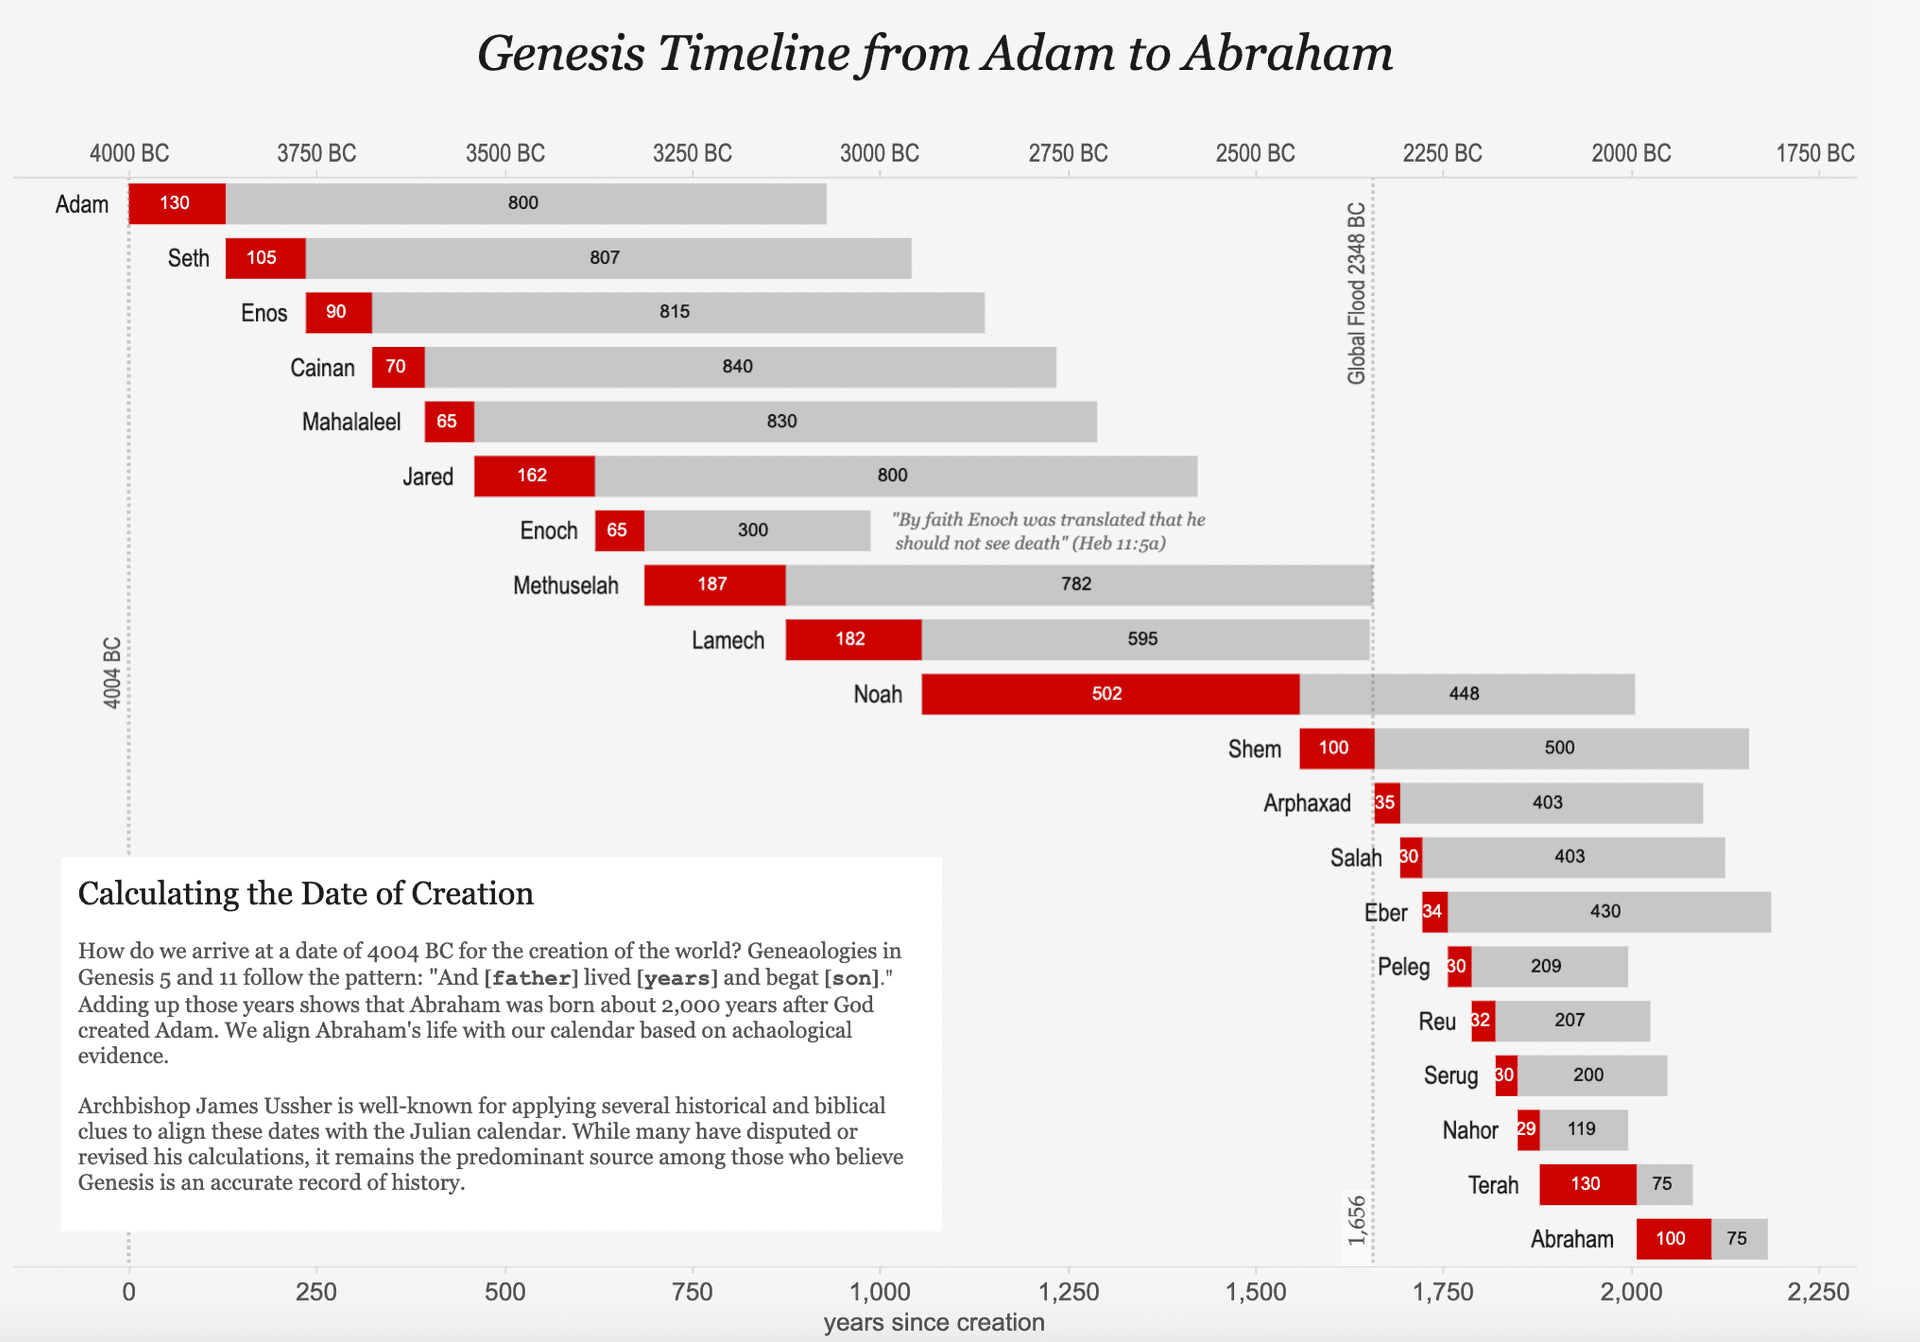 Visualizing the Genesis Timeline from Adam to Abraham